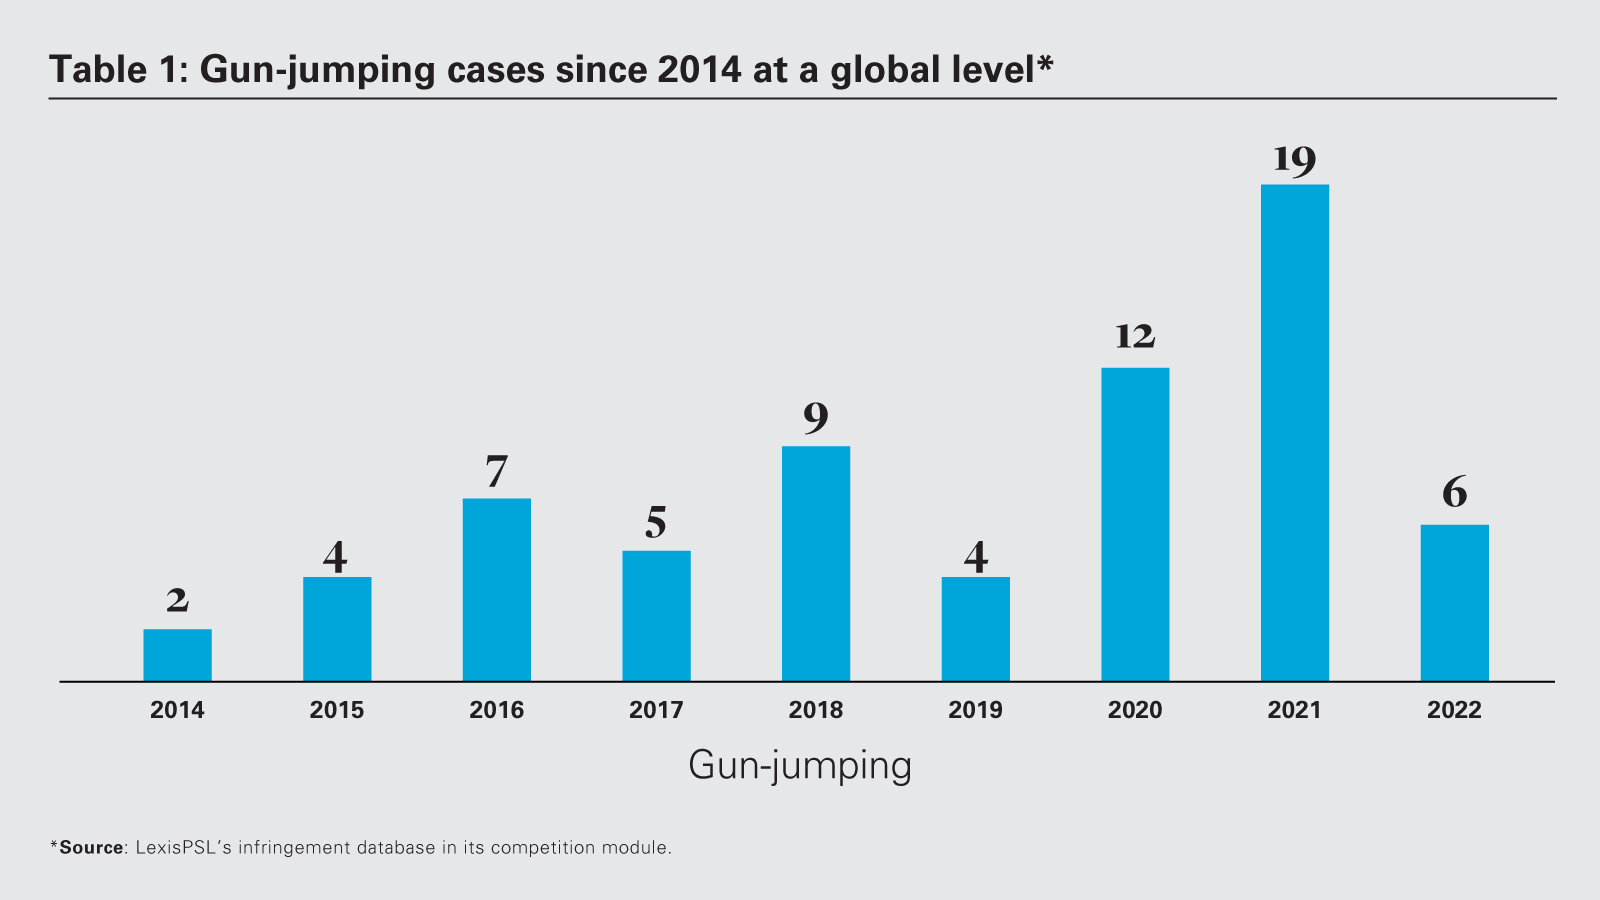 Gun-jumping cases since 2014 at a global level